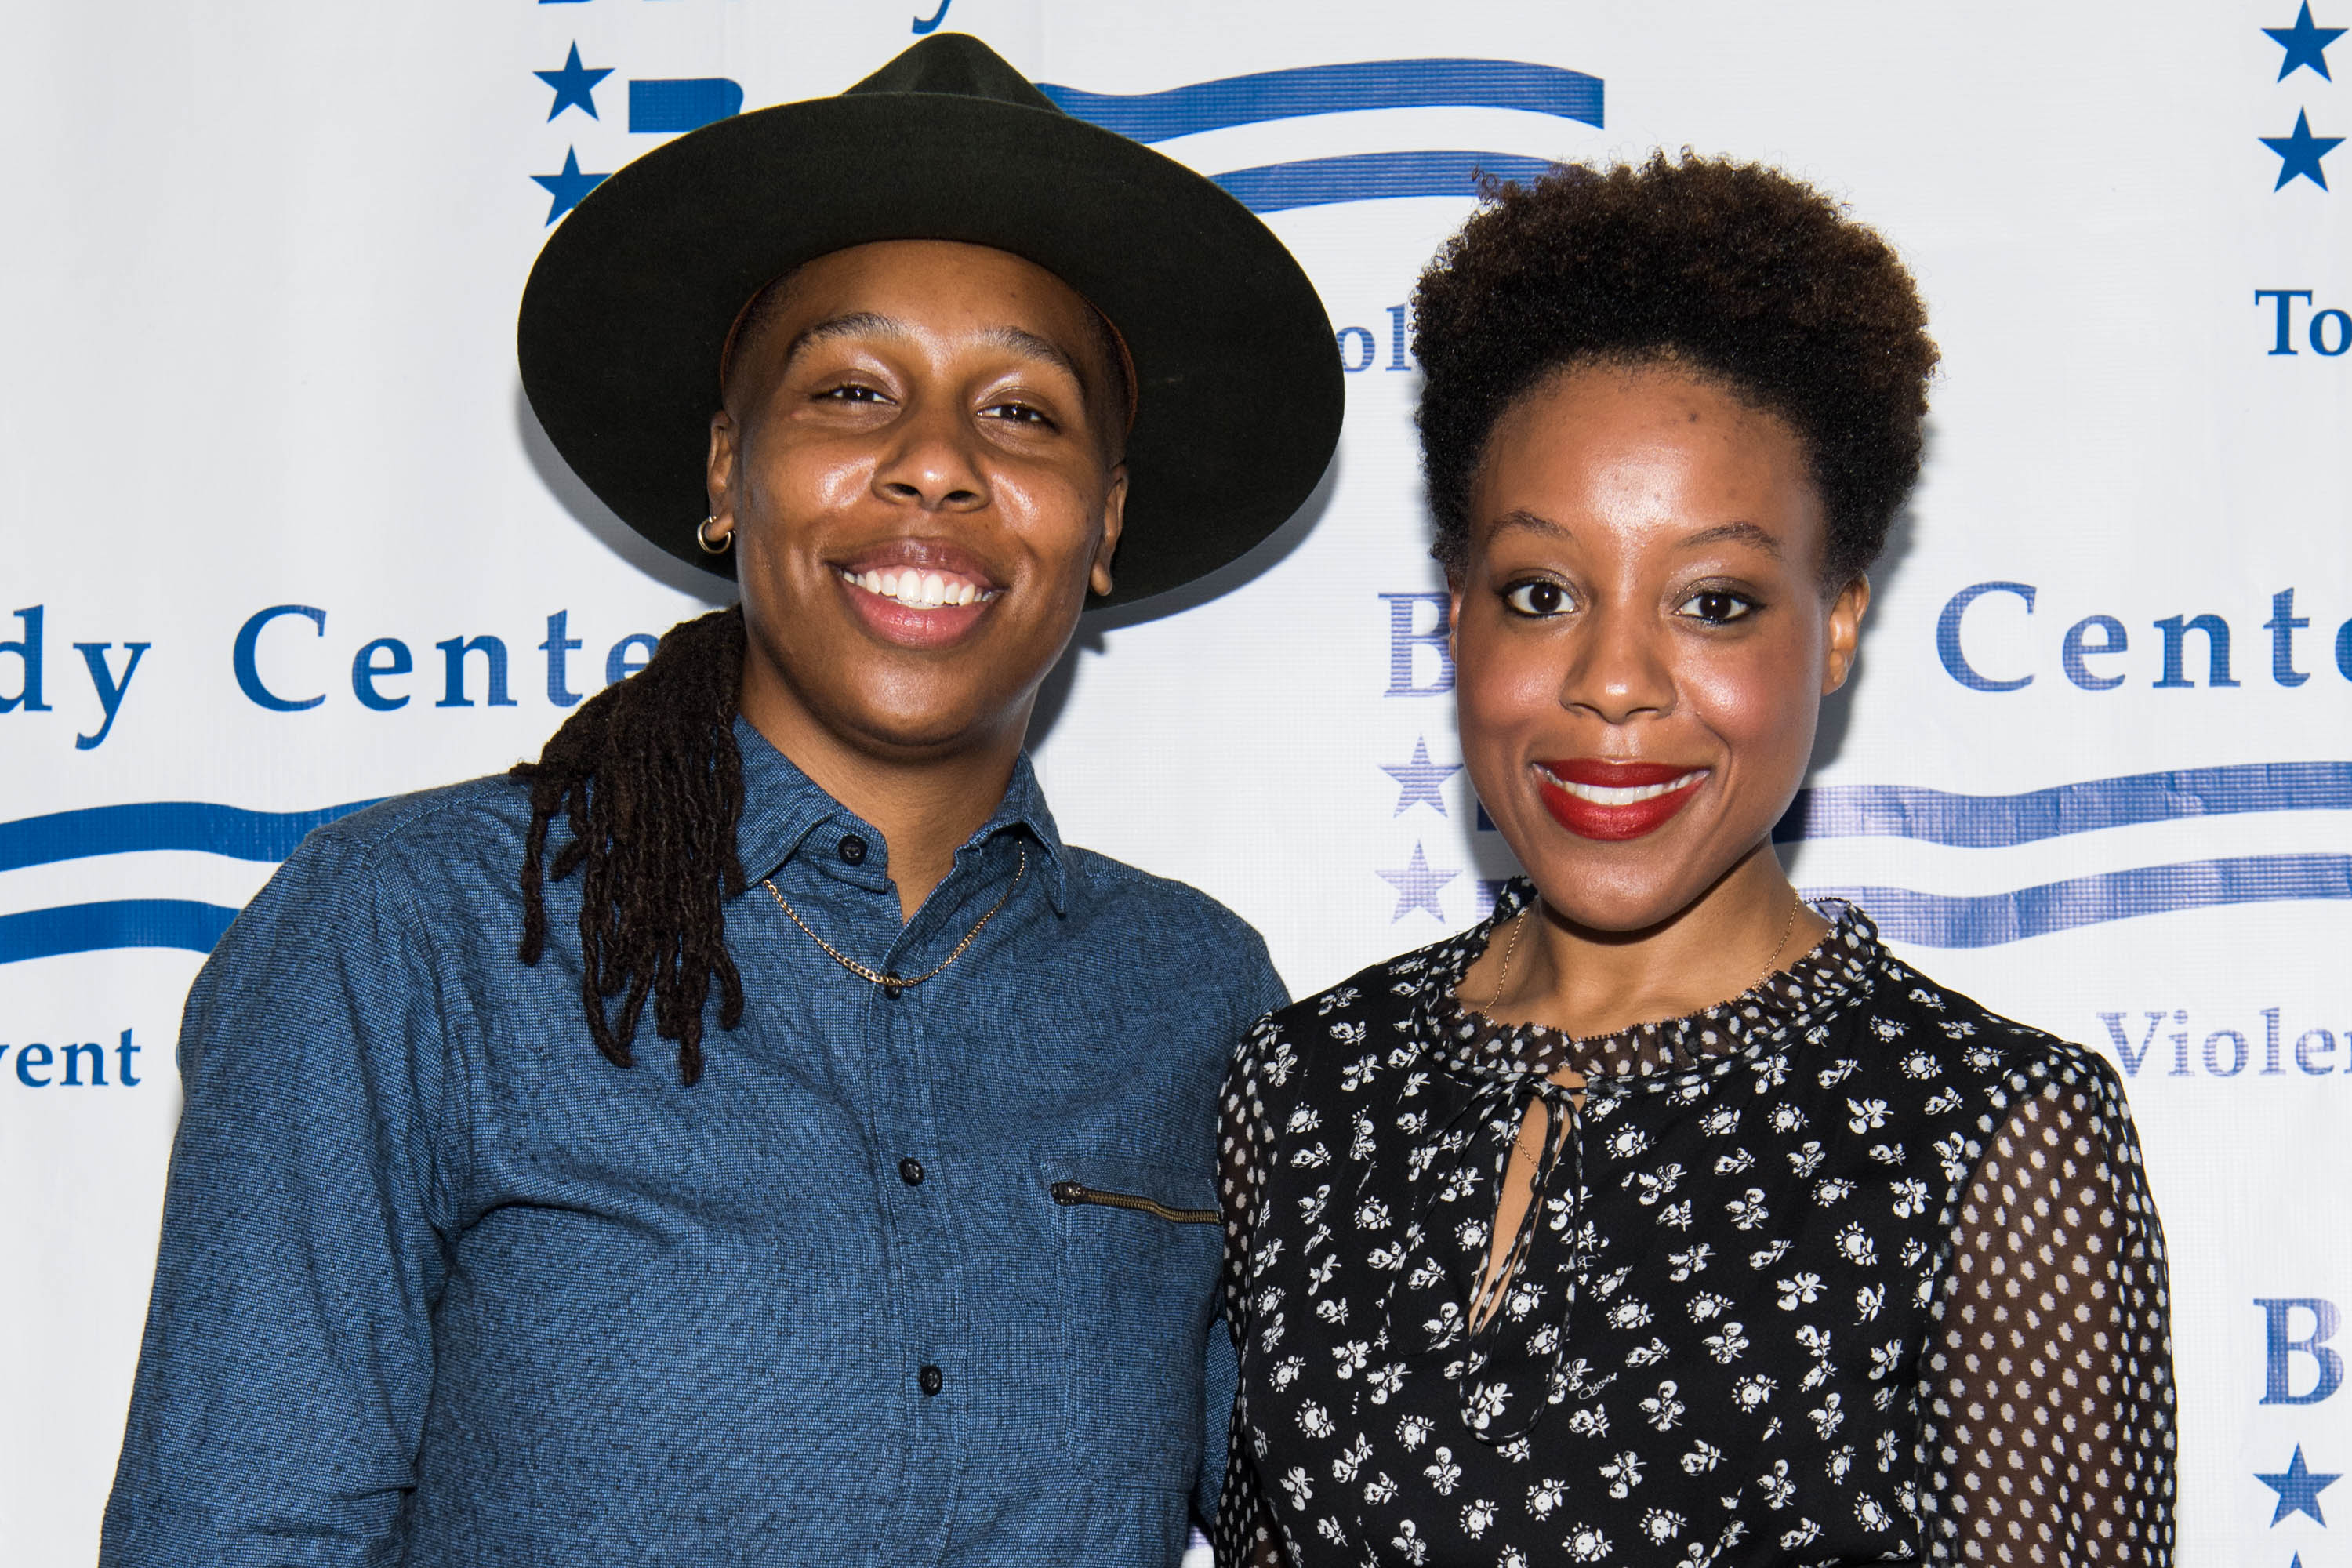 Lena Waithe and lana Mayo at an awards gala in June 2017. | Photo: Getty Images